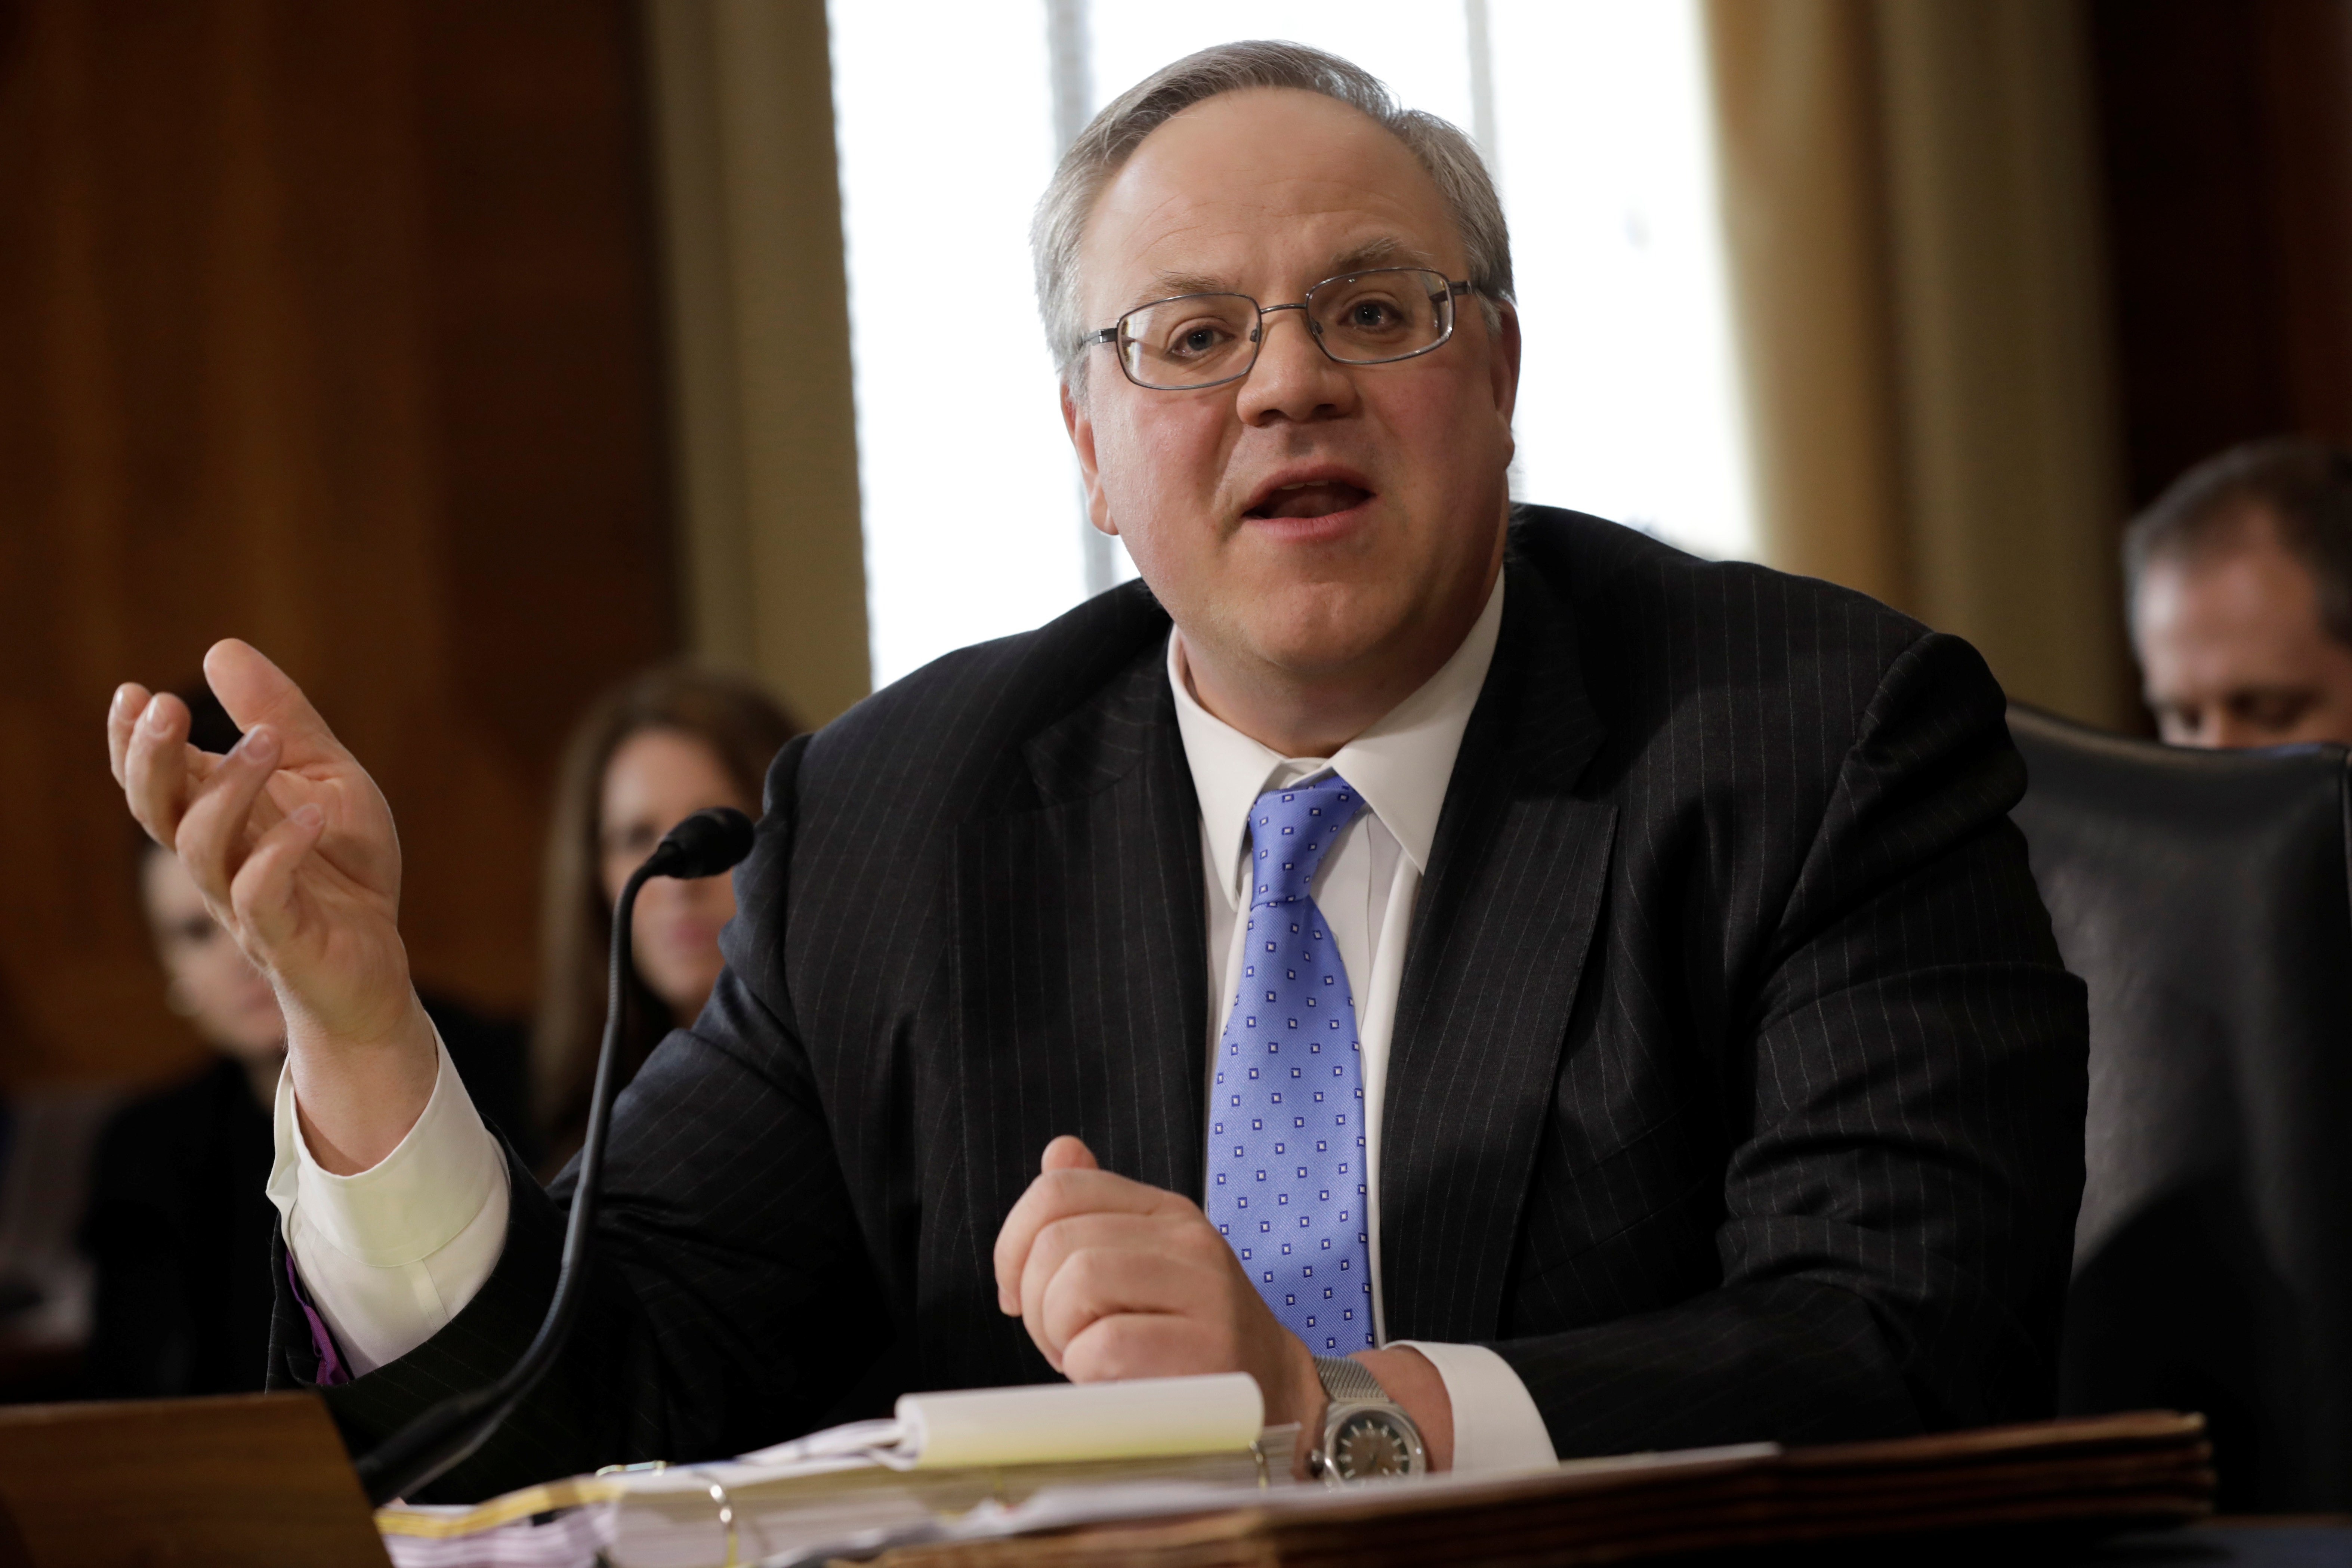 Former energy lobbyist David Bernhardt testifies before a Senate Energy and Natural Resources Committee